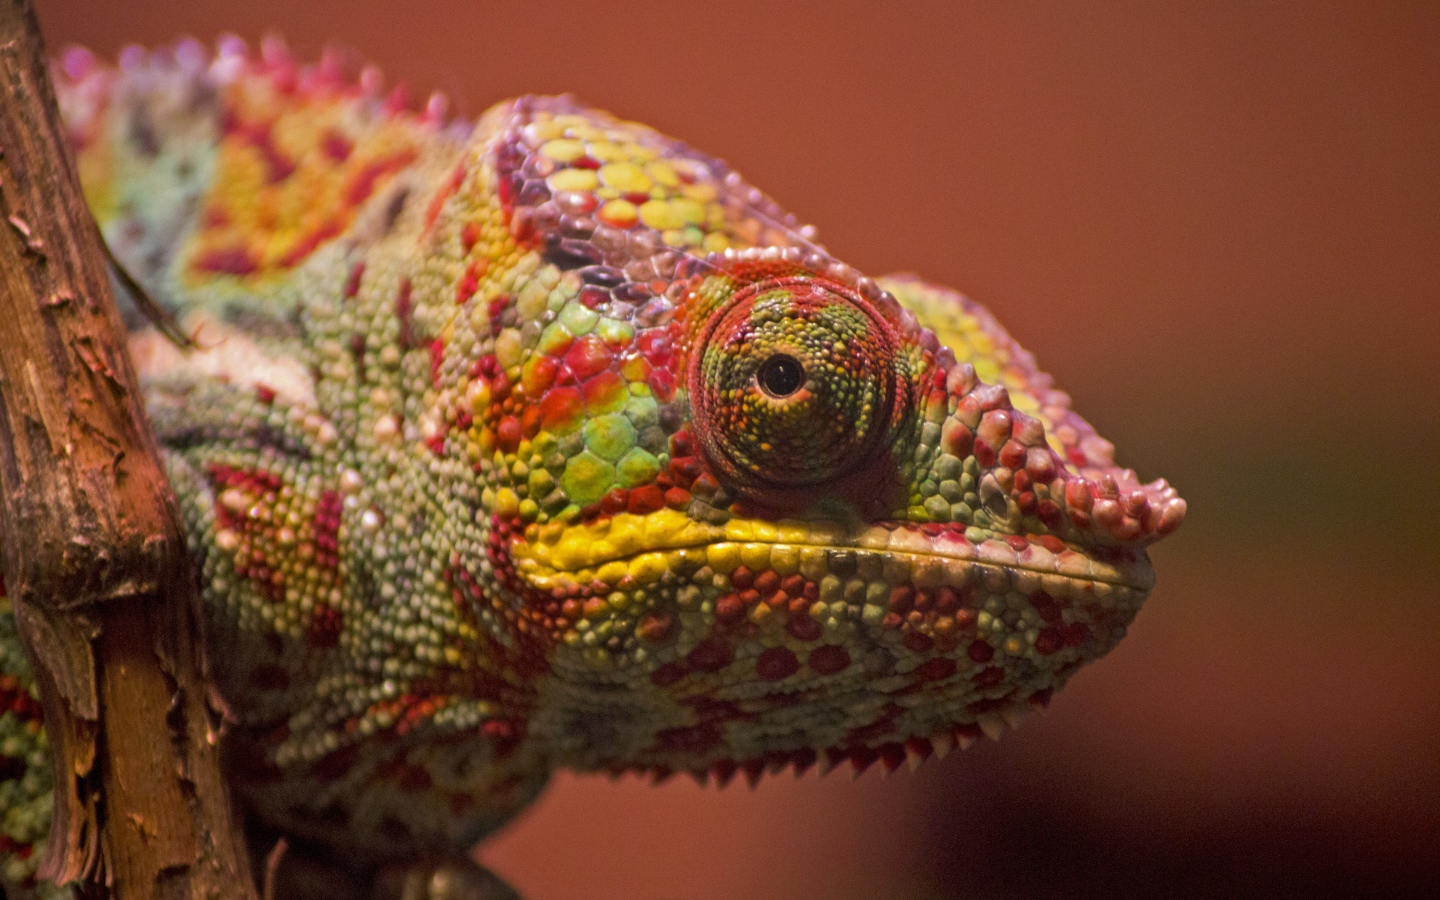 Multi-colored chameleon sitting on a branch close-up